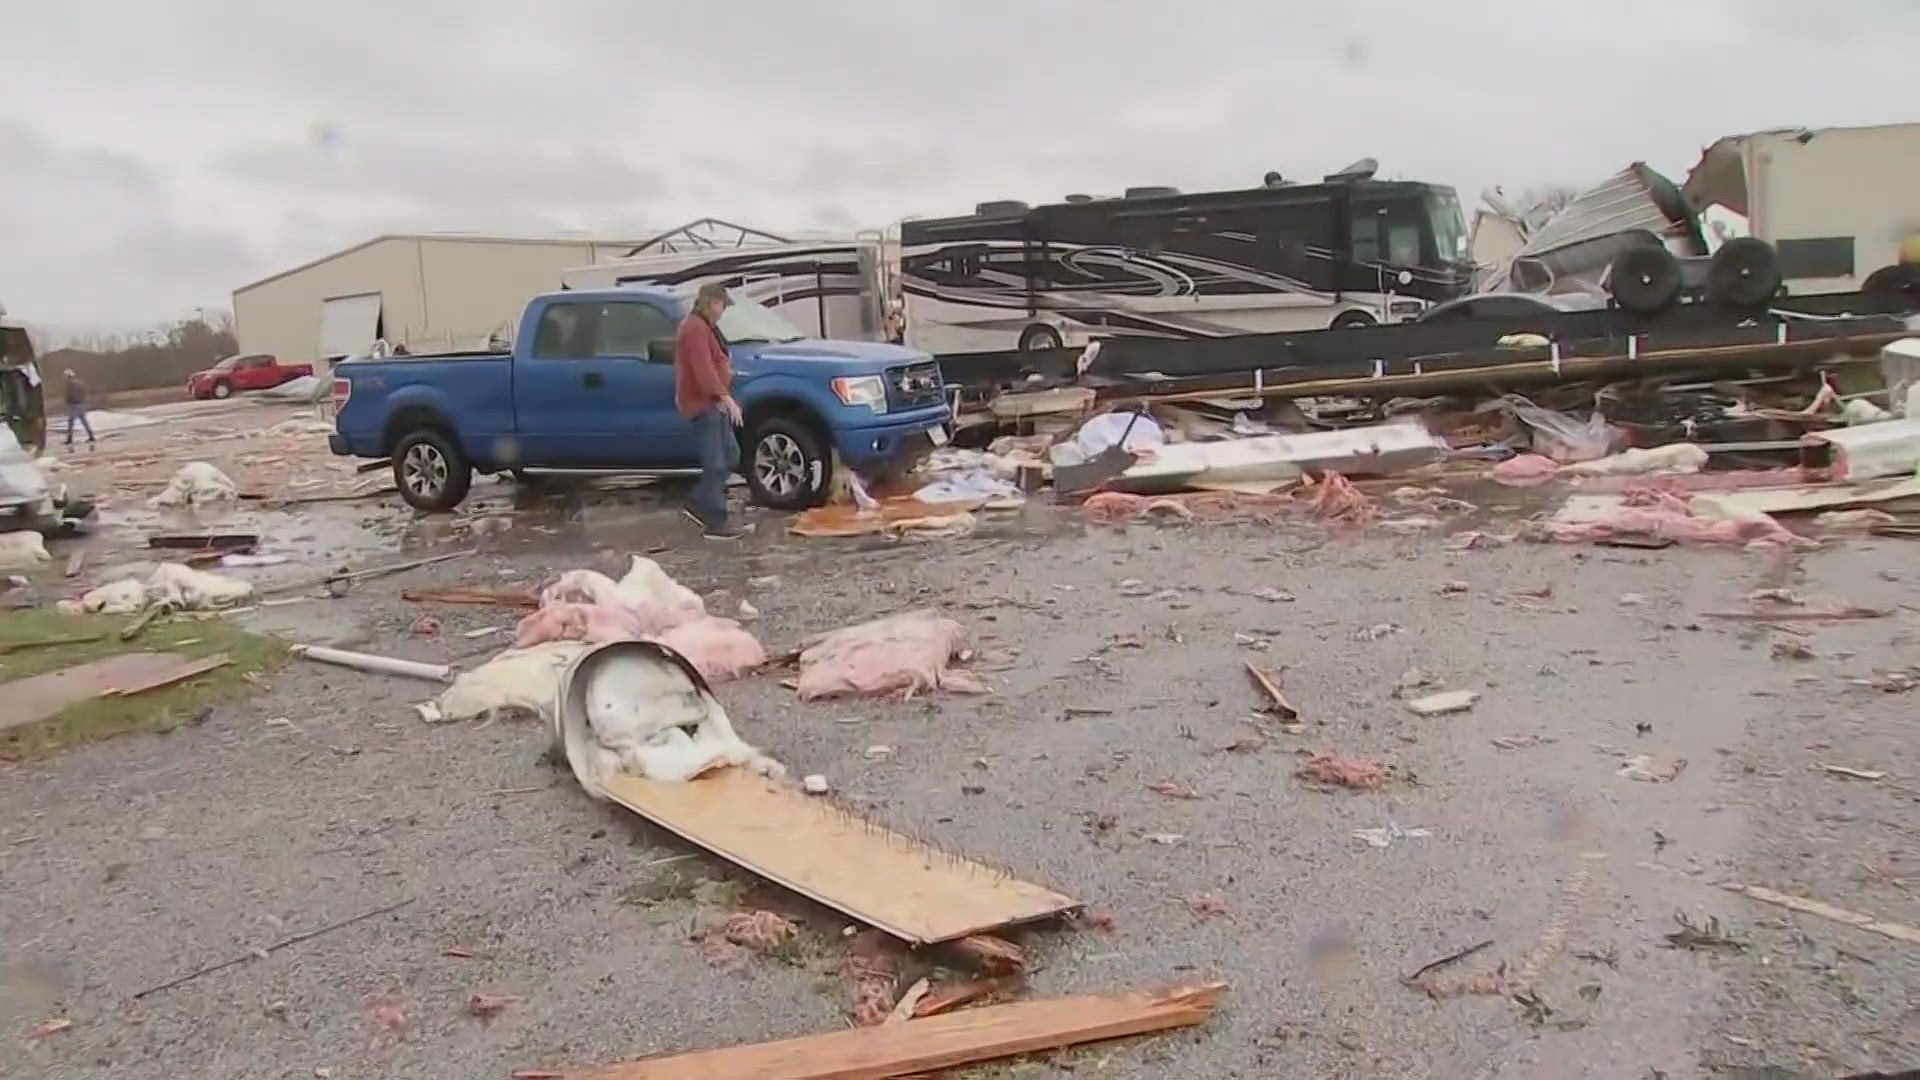 Video shows icy roads in north Texas and severe storm damage near Houston.